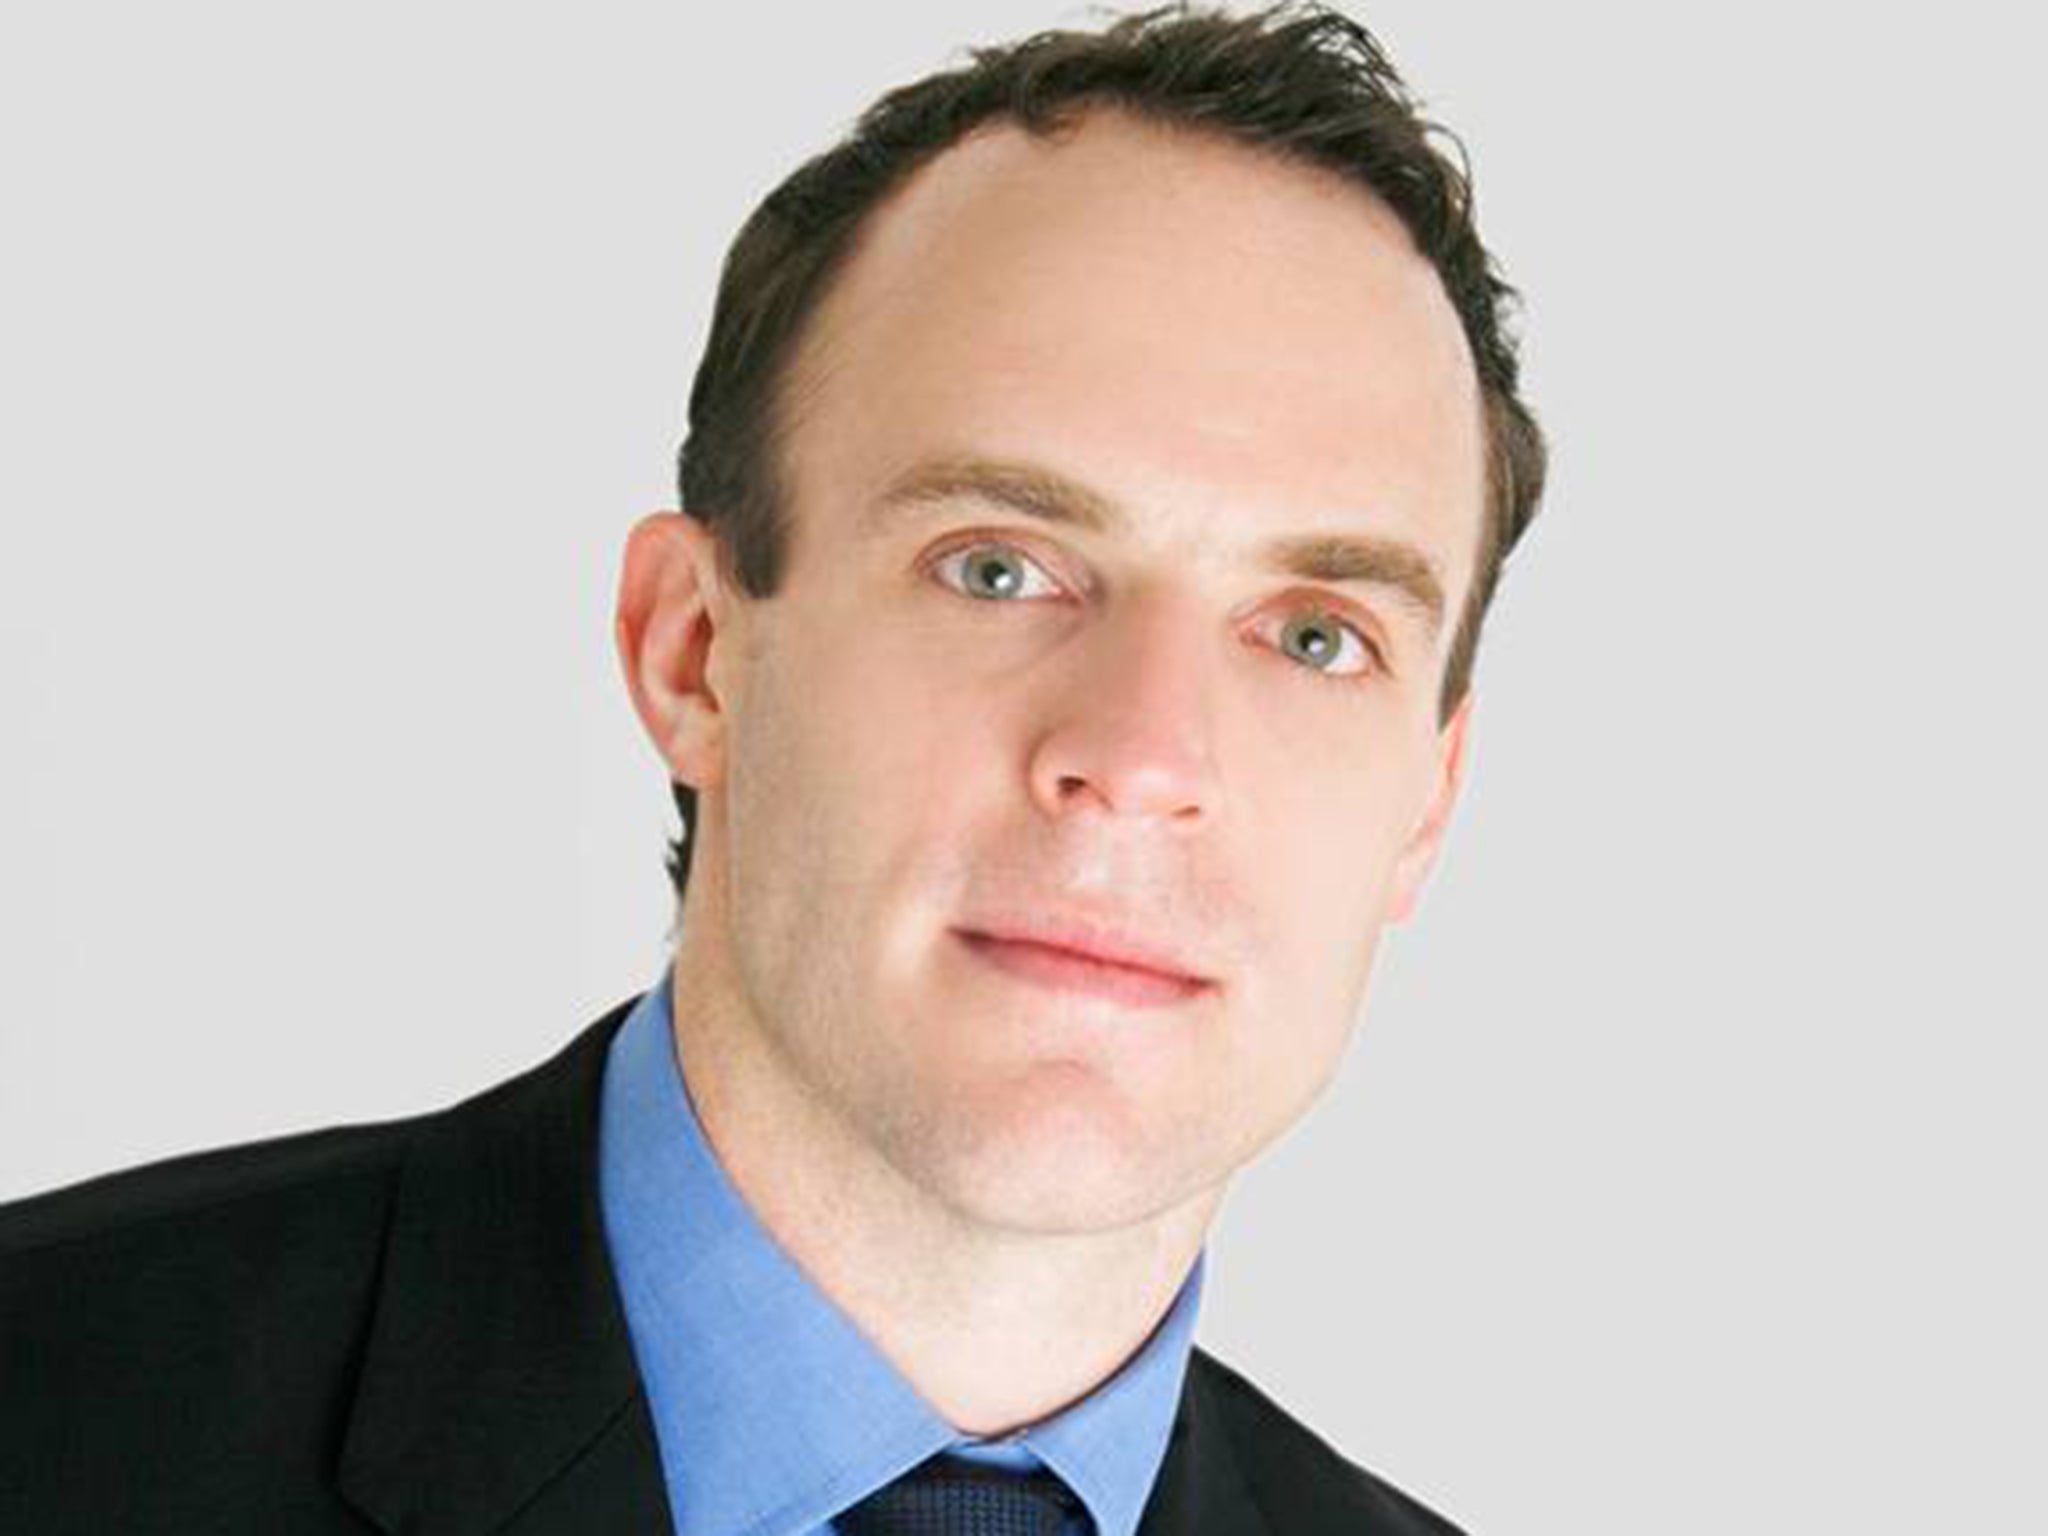 Dominic Raab, a civil libertarian MP, was promoted to government after the election to develop a British Bill of Rights to replace the HRA